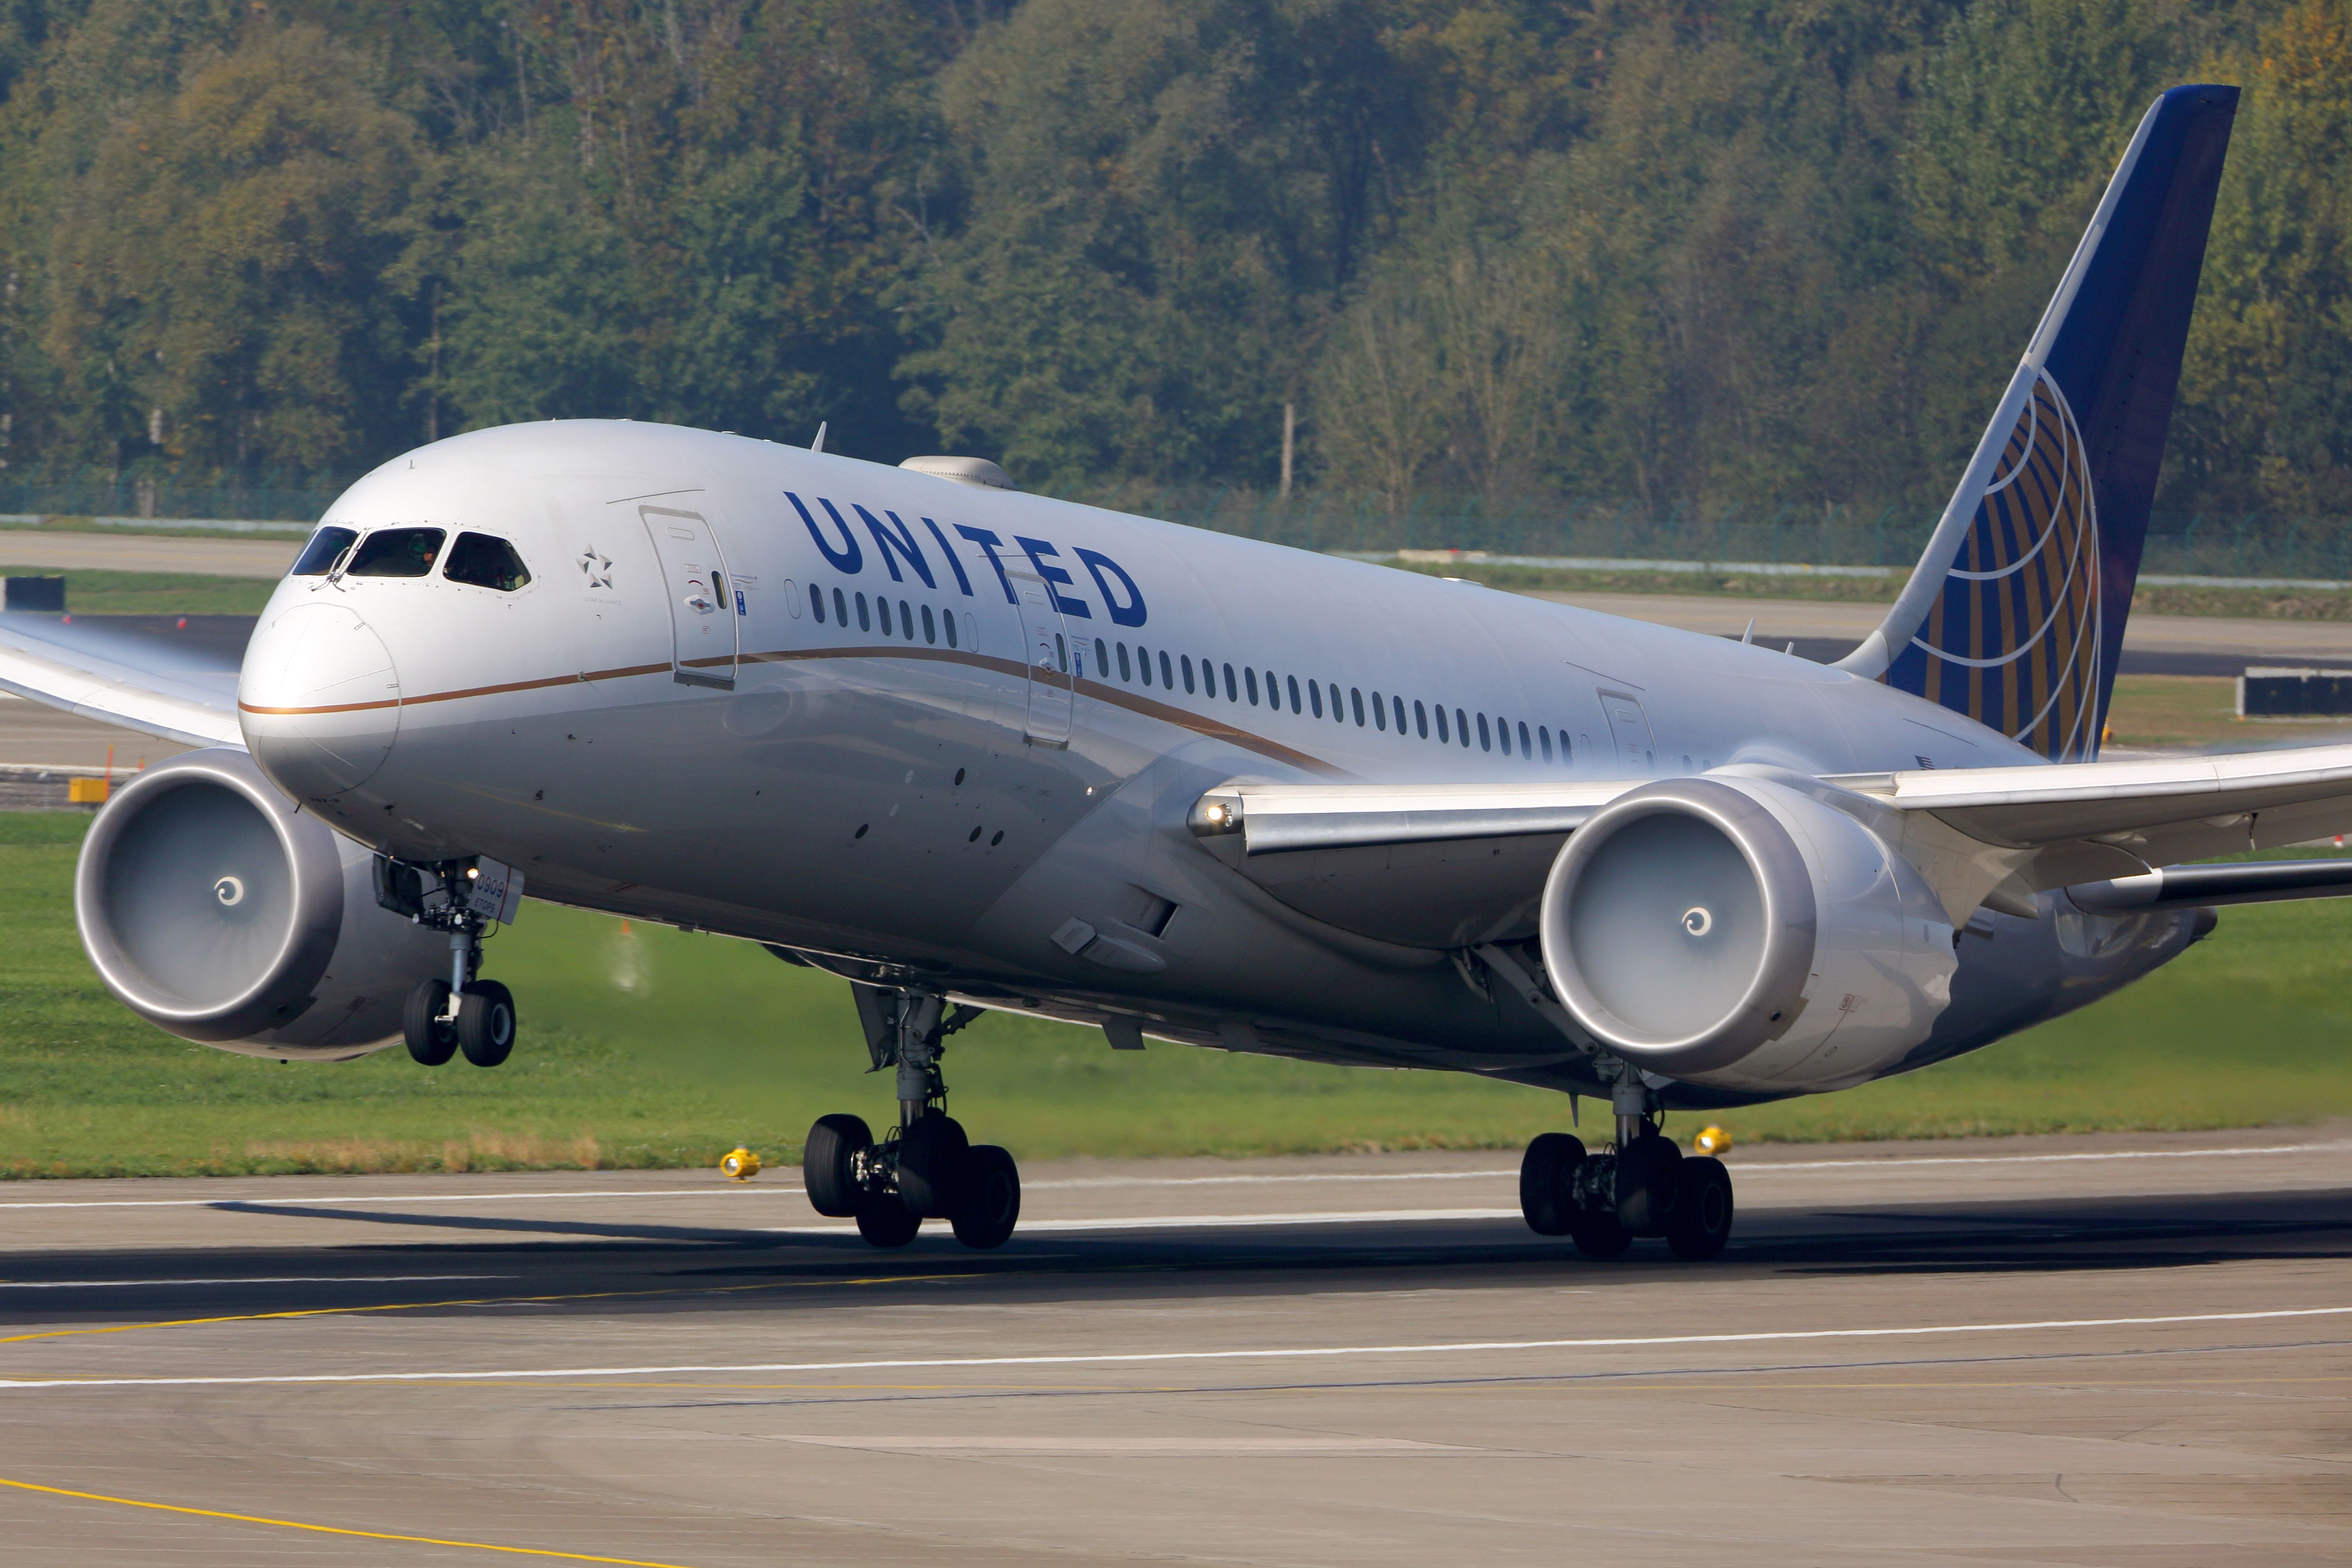 United Wants To Add More Flights To China